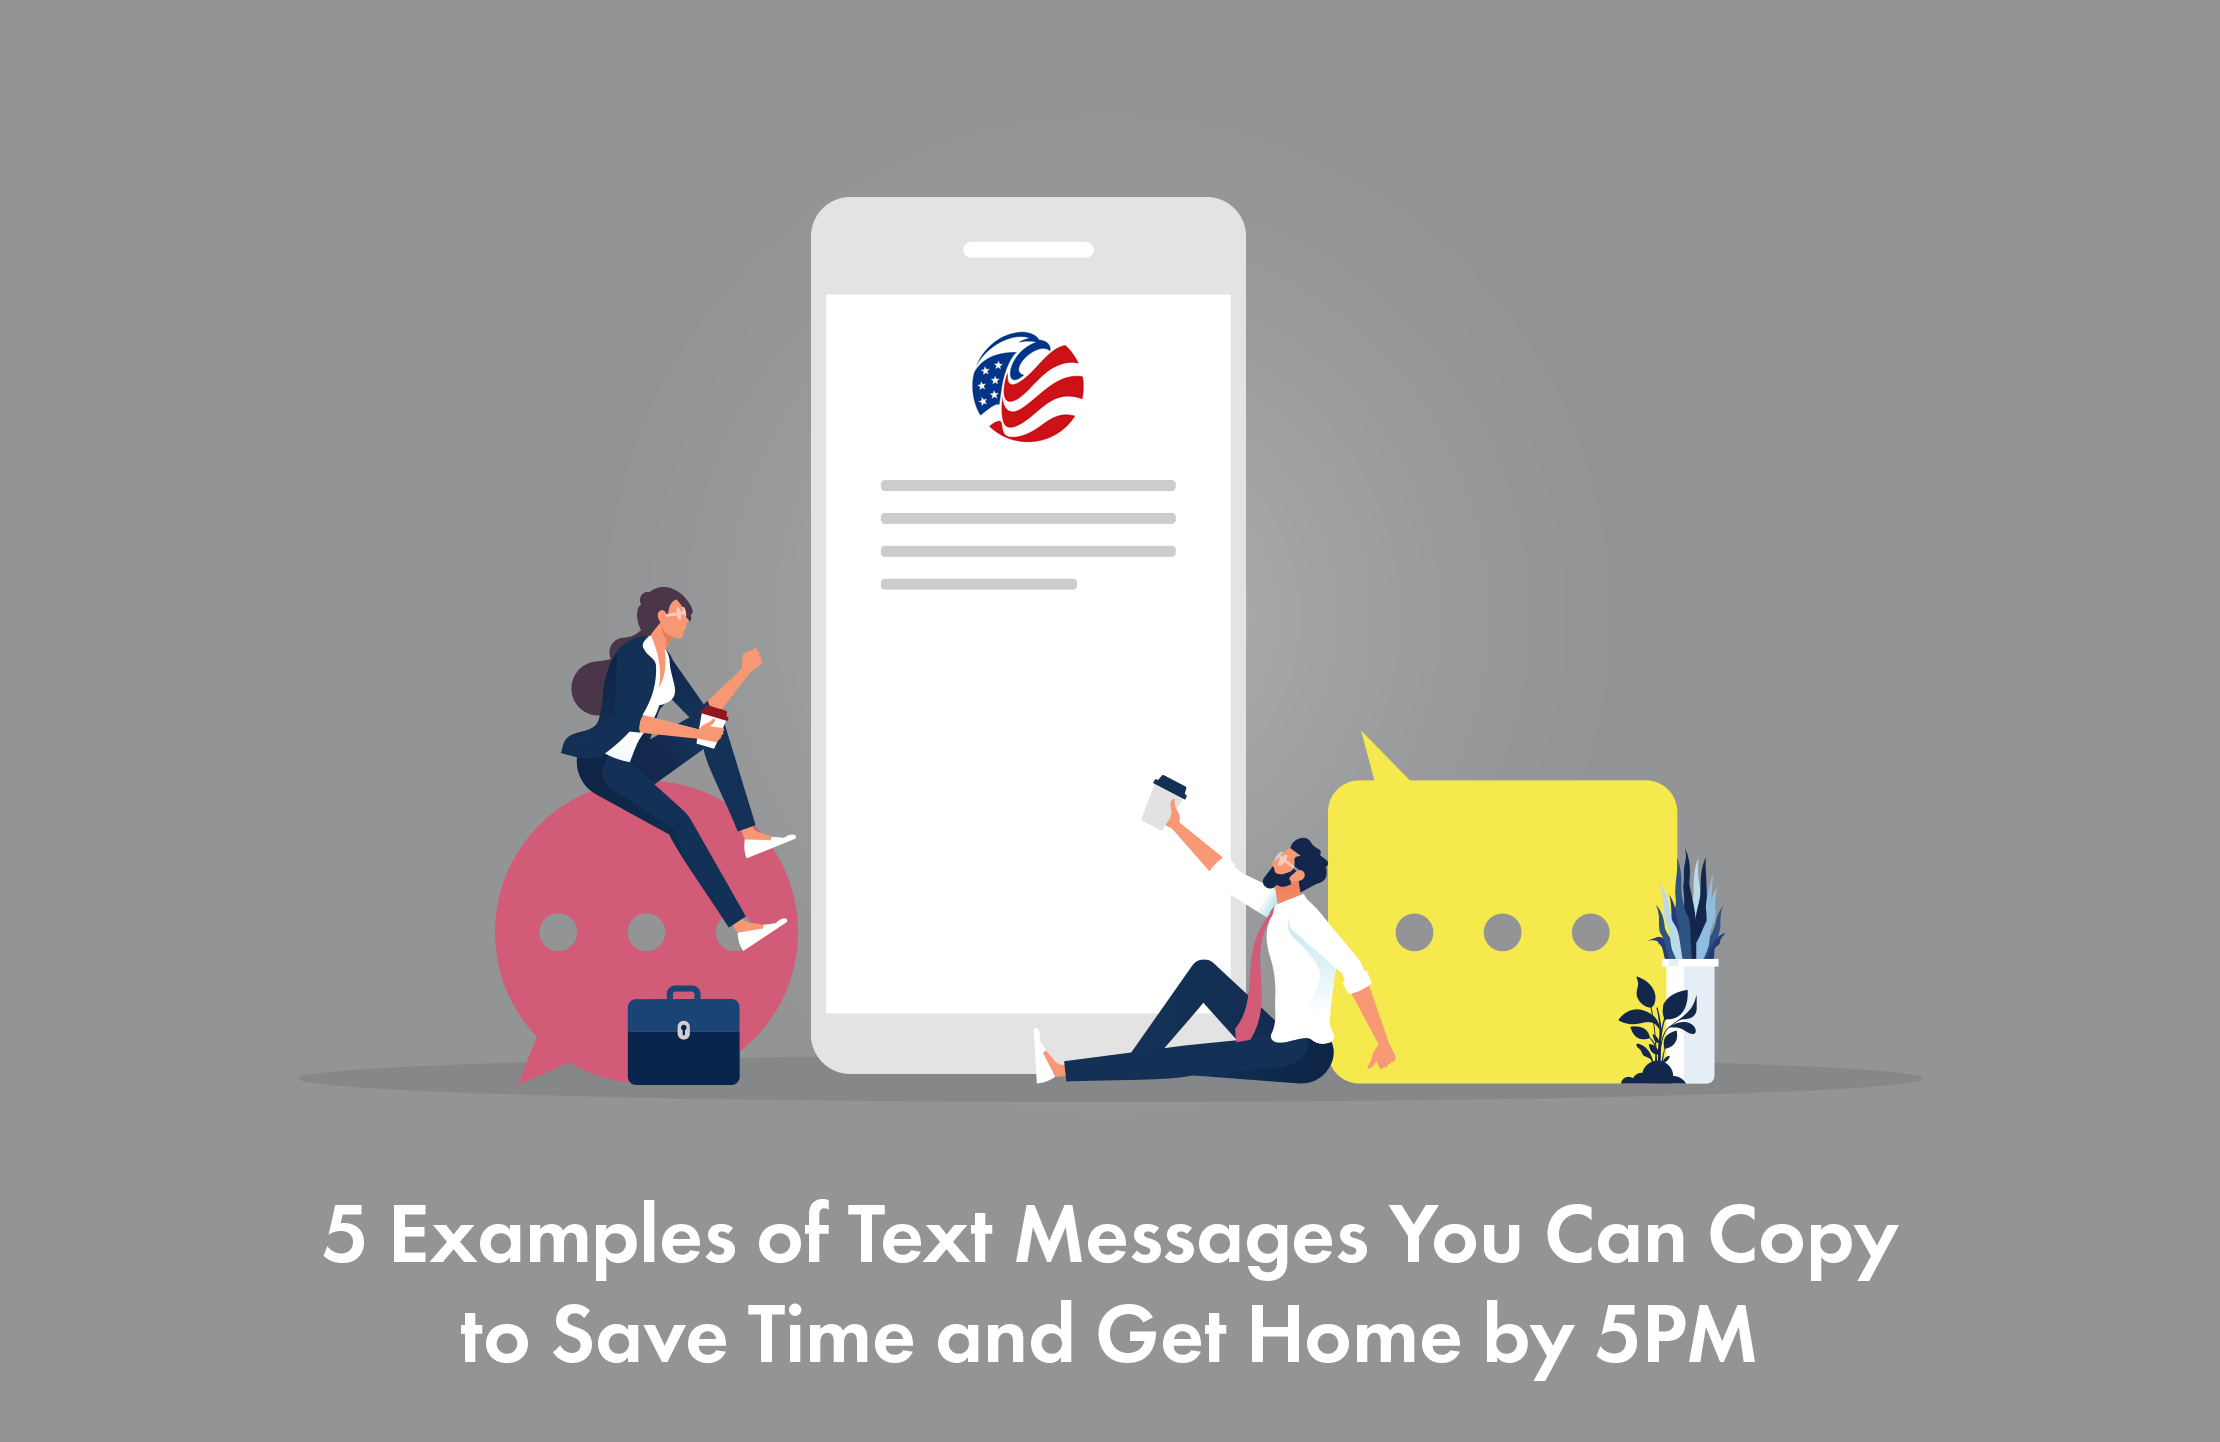 5 Examples of Text Messages You Can Copy to Save Time and Get Home by 5PM